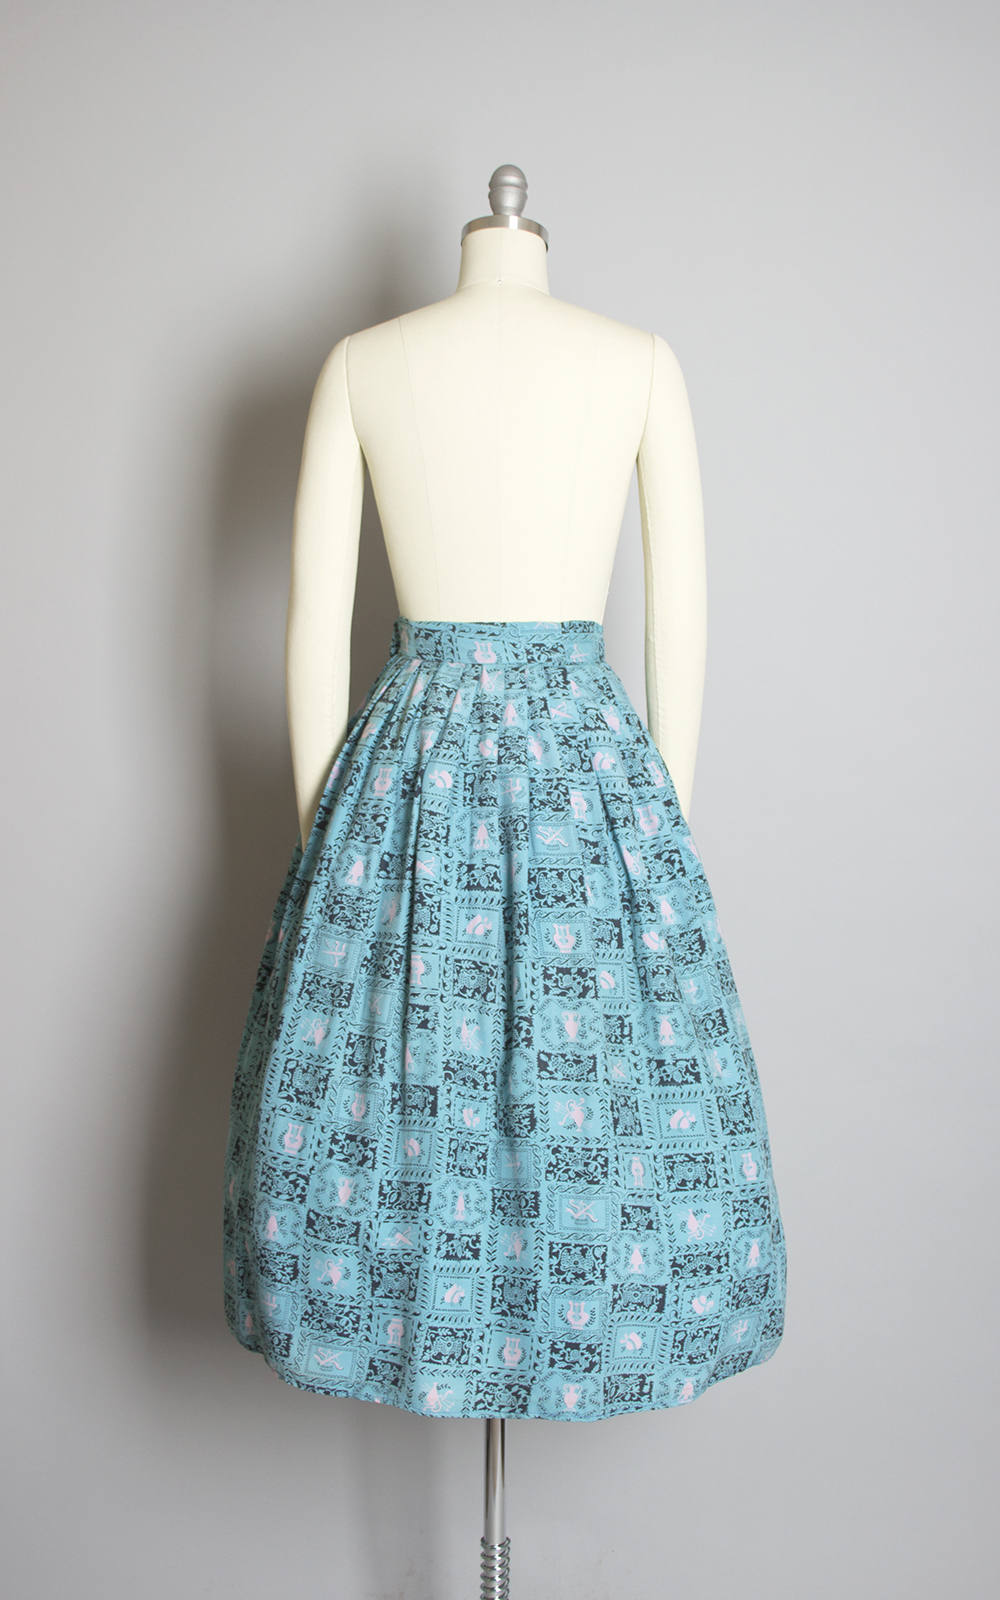 Vintage 1940s Skirt | 40s Blue Floral Novelty Print Rayon Geometric Pleated Full Skirt (x-small)